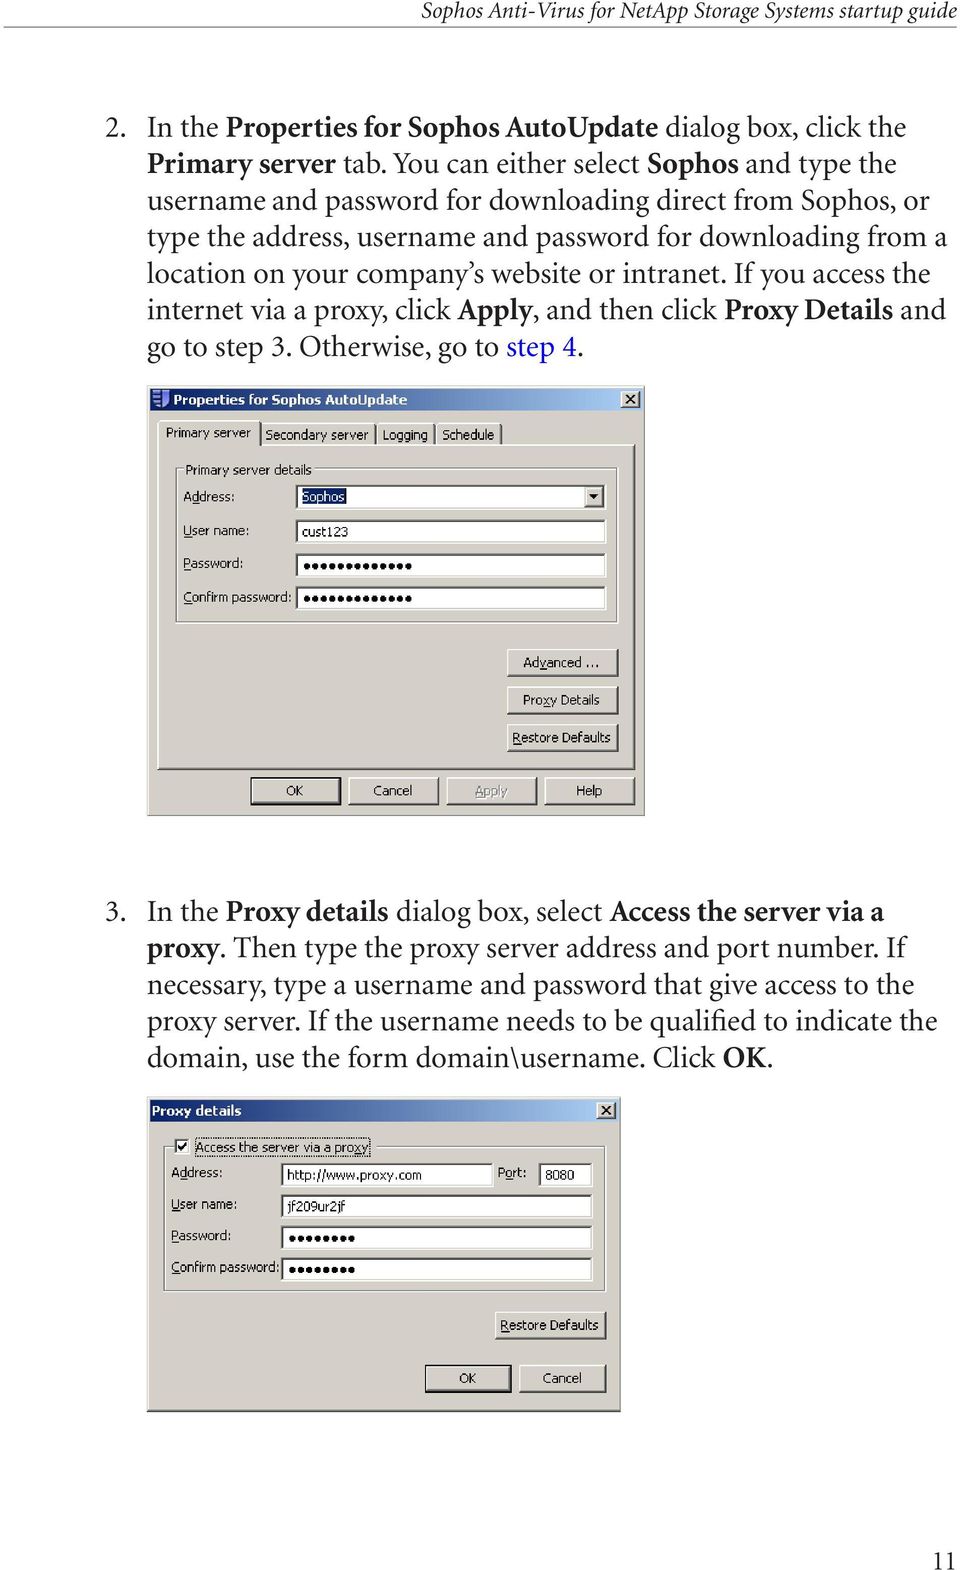 company s website or intranet. If you access the internet via a proxy, click Apply, and then click Proxy Details and go to step 3. Otherwise, go to step 4.